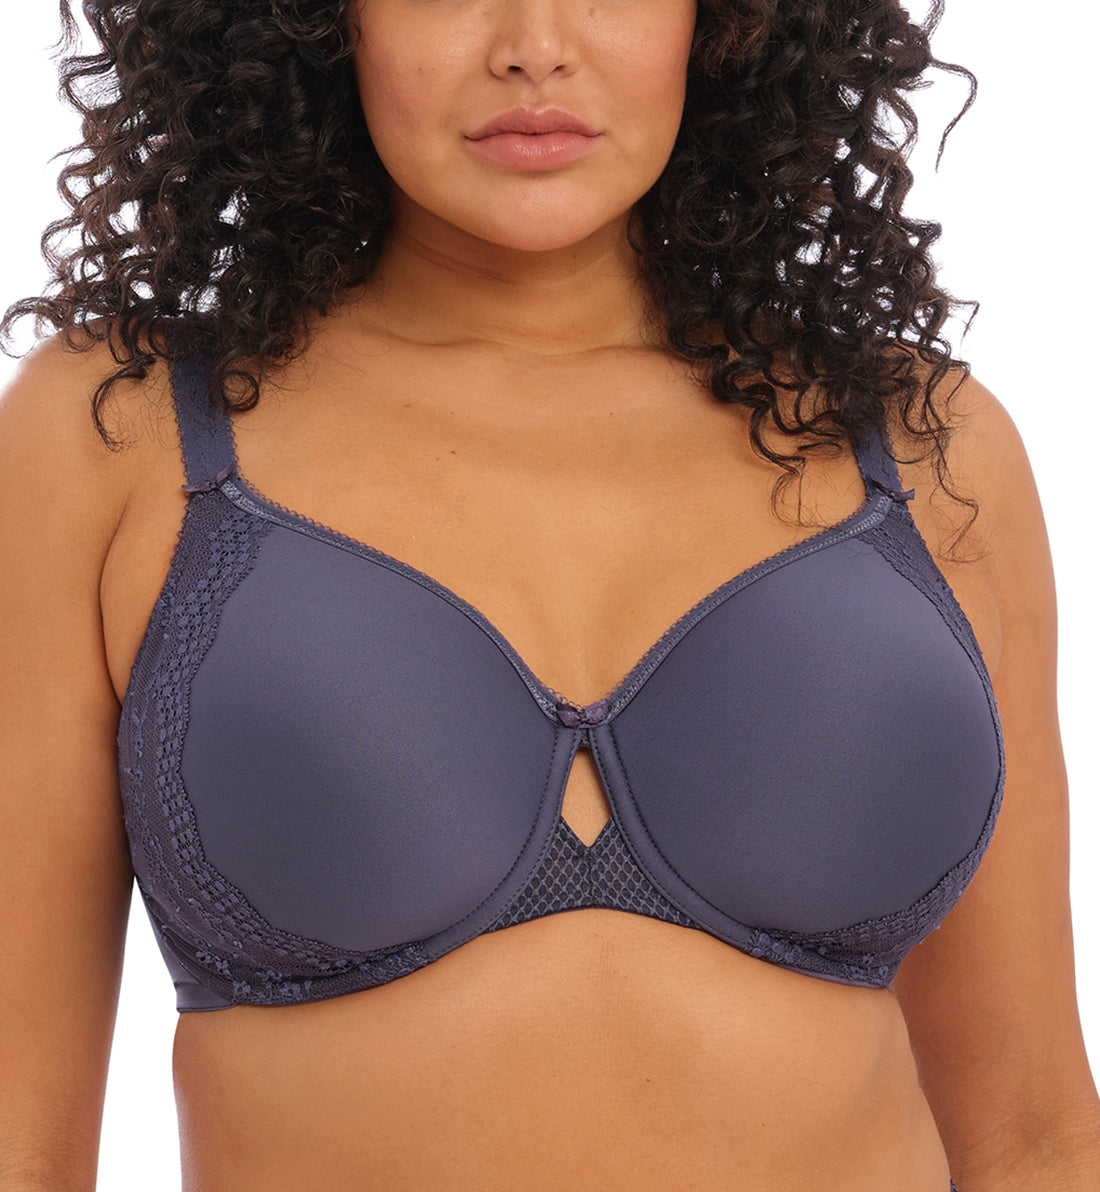 Elomi Charley Bandless Spacer Seamless Underwire Bra (4383),34G,Storm - Storm,34G